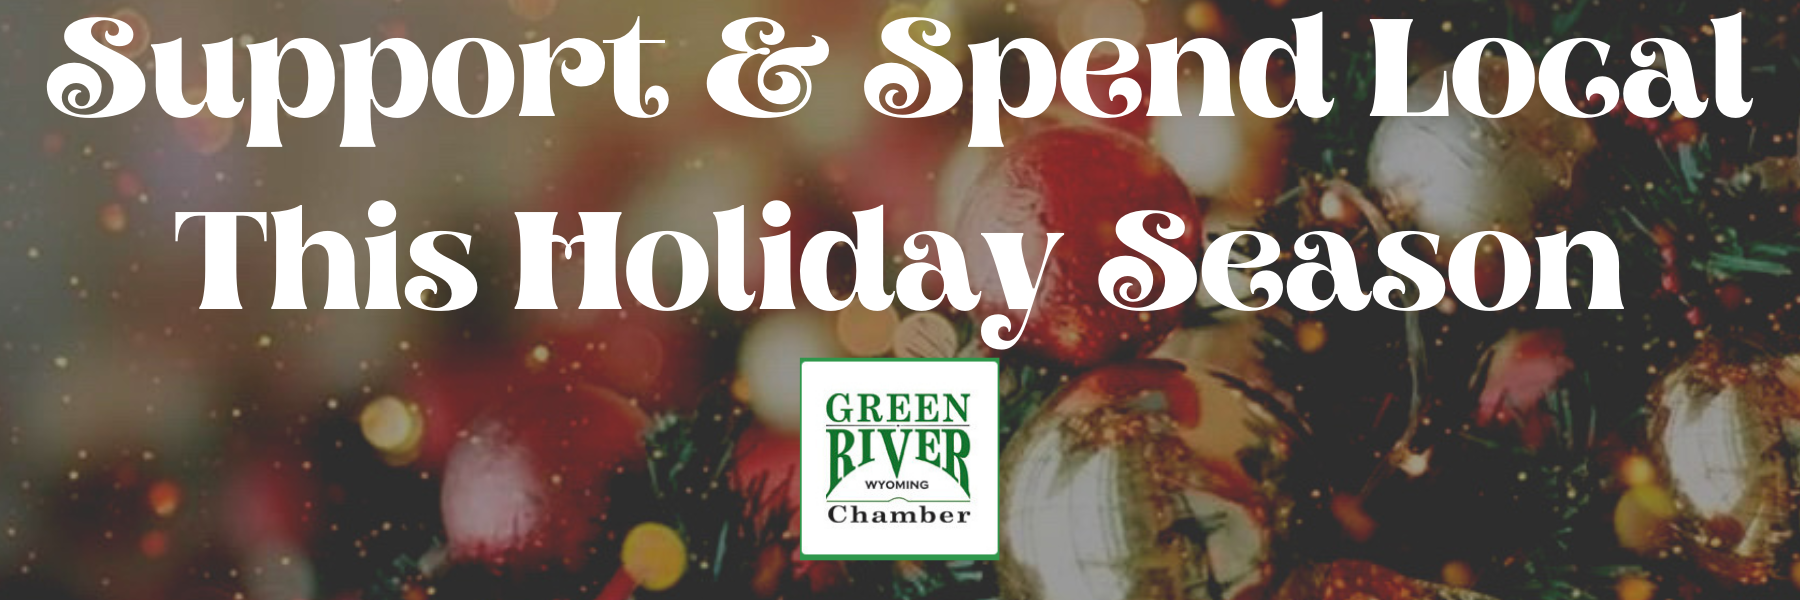 Support &amp; Spend Local This a holiday Season (1)